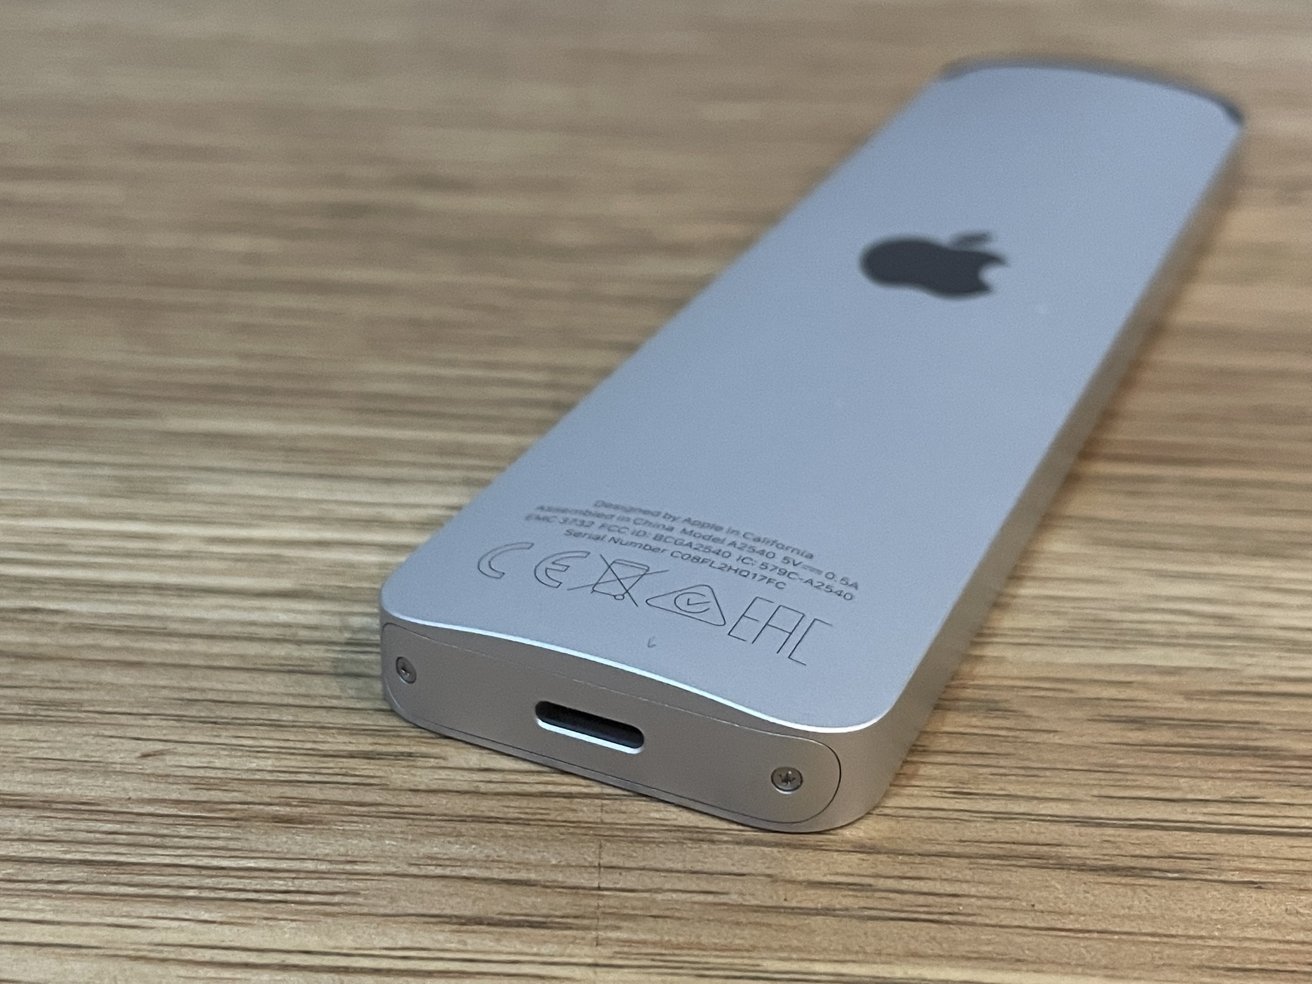 Siri Remote uses a Lightning Port for charging